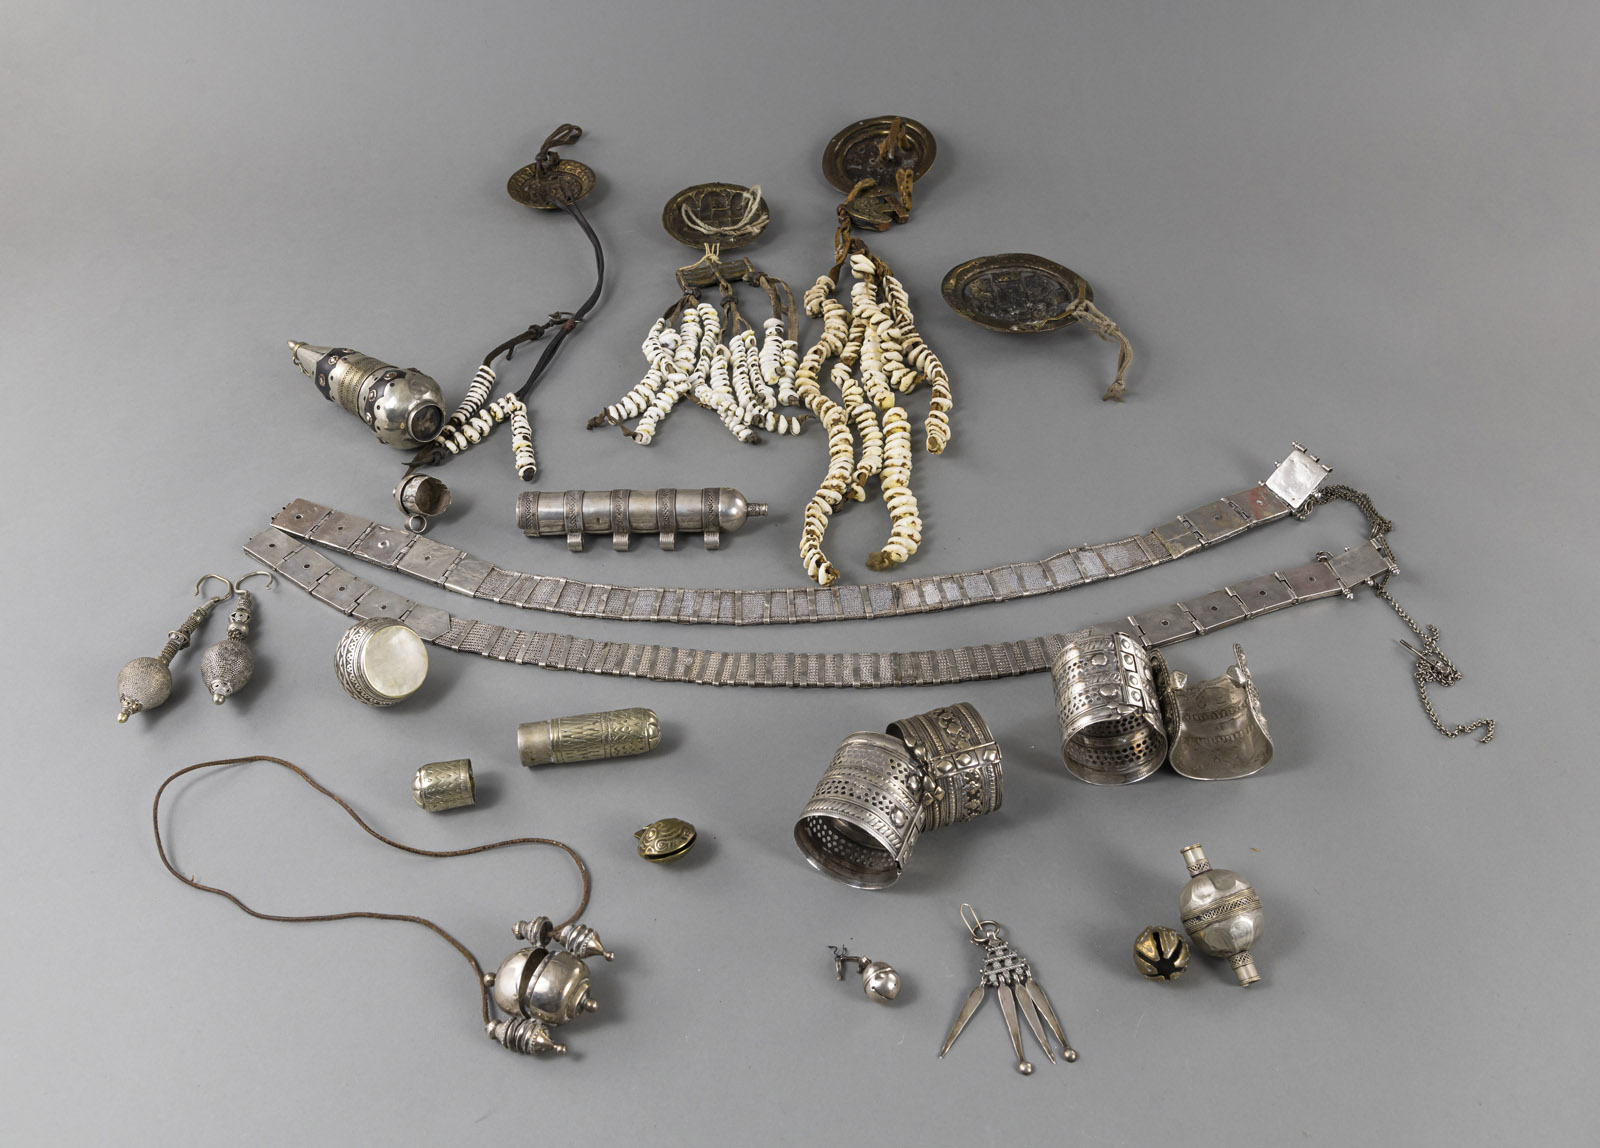 A GROUP OF 22 PIECES OF JEWELRY, PARTLY SILVER: BELTS, BRACELETS, AMULETS AND MEDALLION CHAINS - Image 3 of 3